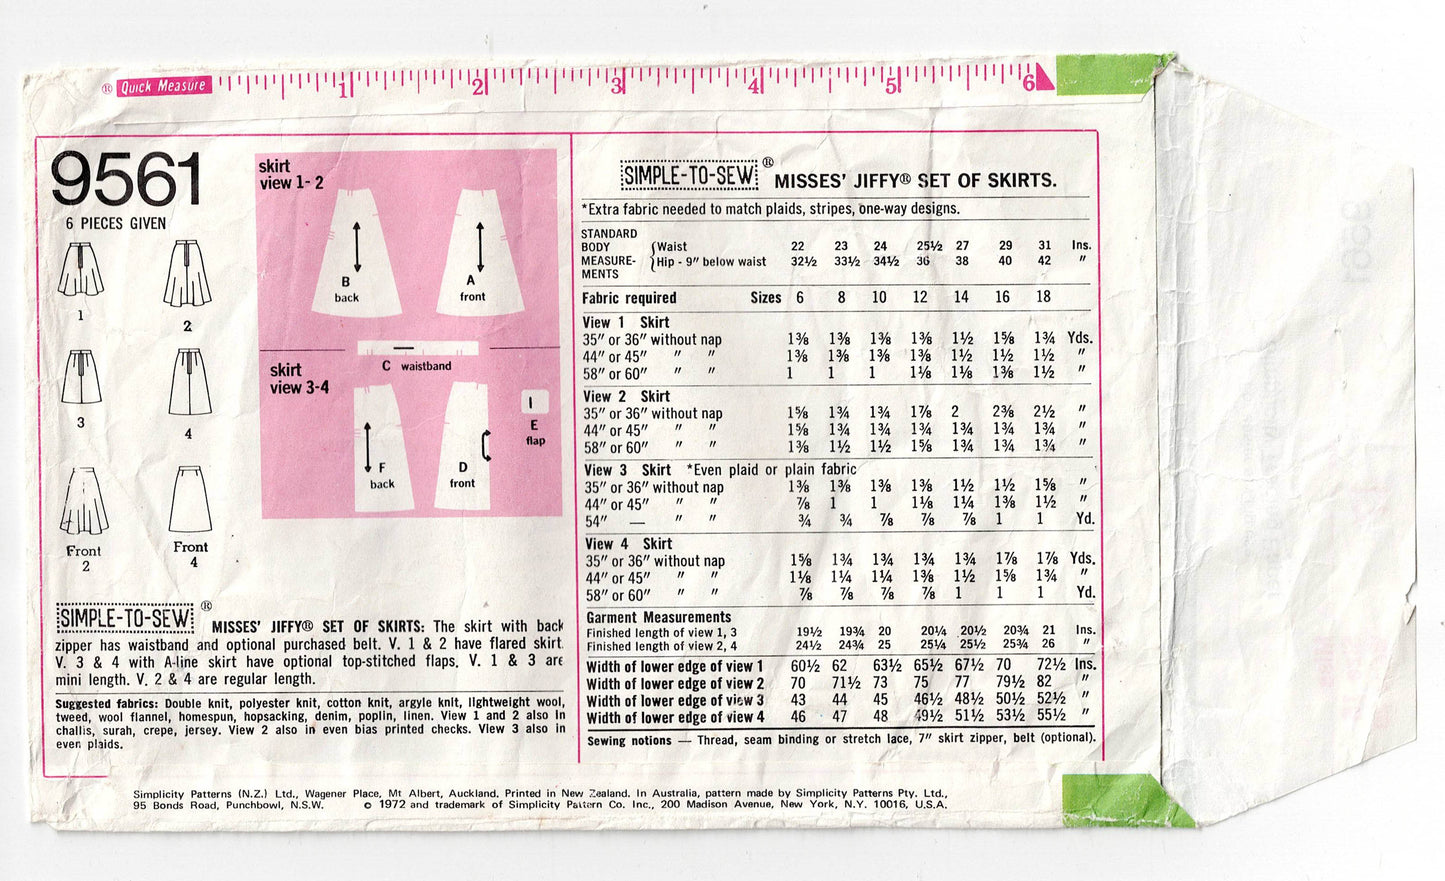 Simplicity 9561 Womens JIFFY Mini or Regular Length Skirts 1970s Vintage Sewing Pattern Size 16 Waist 29 inches